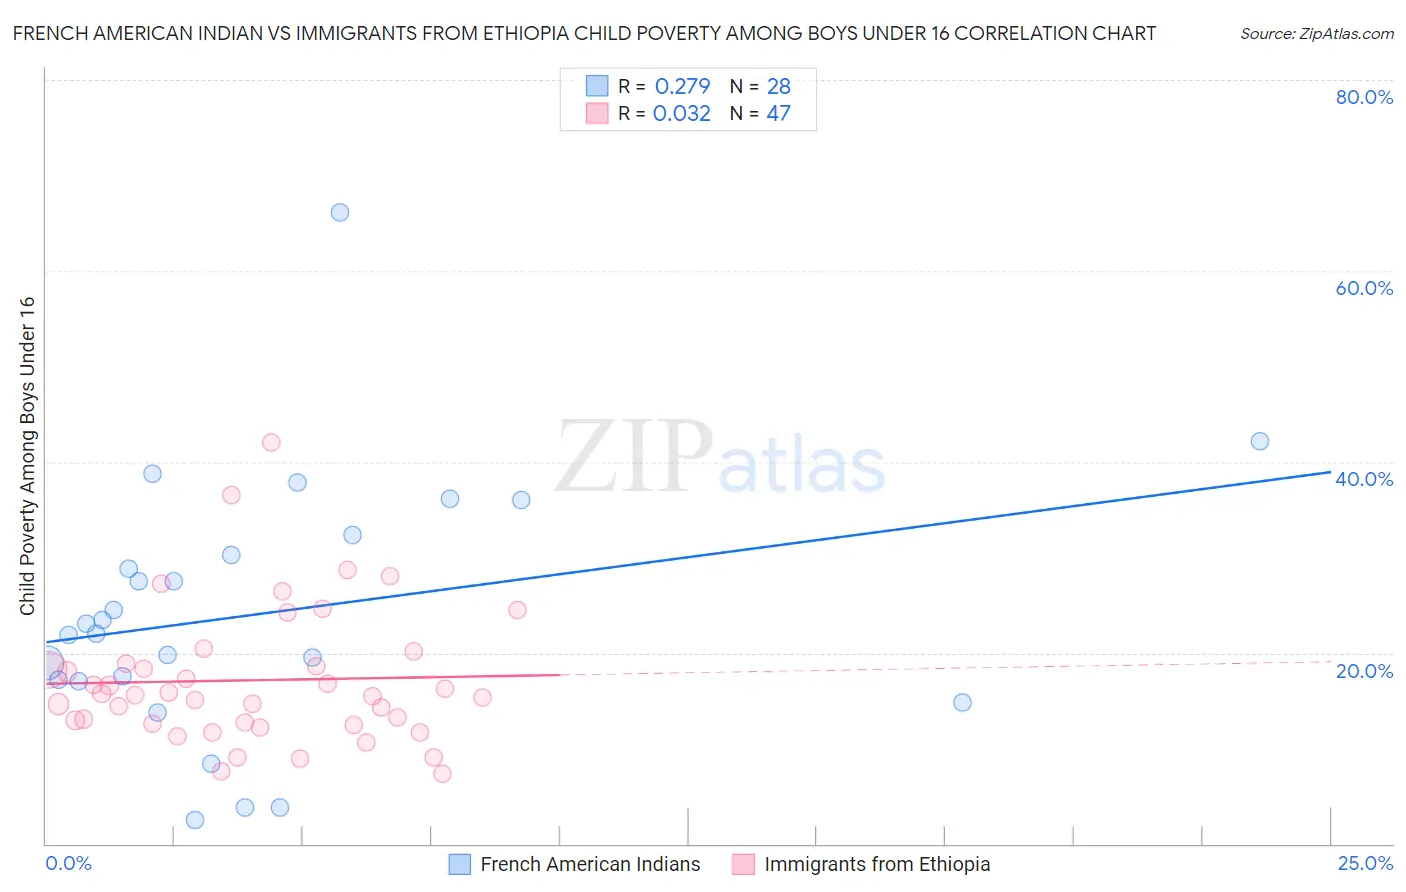 French American Indian vs Immigrants from Ethiopia Child Poverty Among Boys Under 16